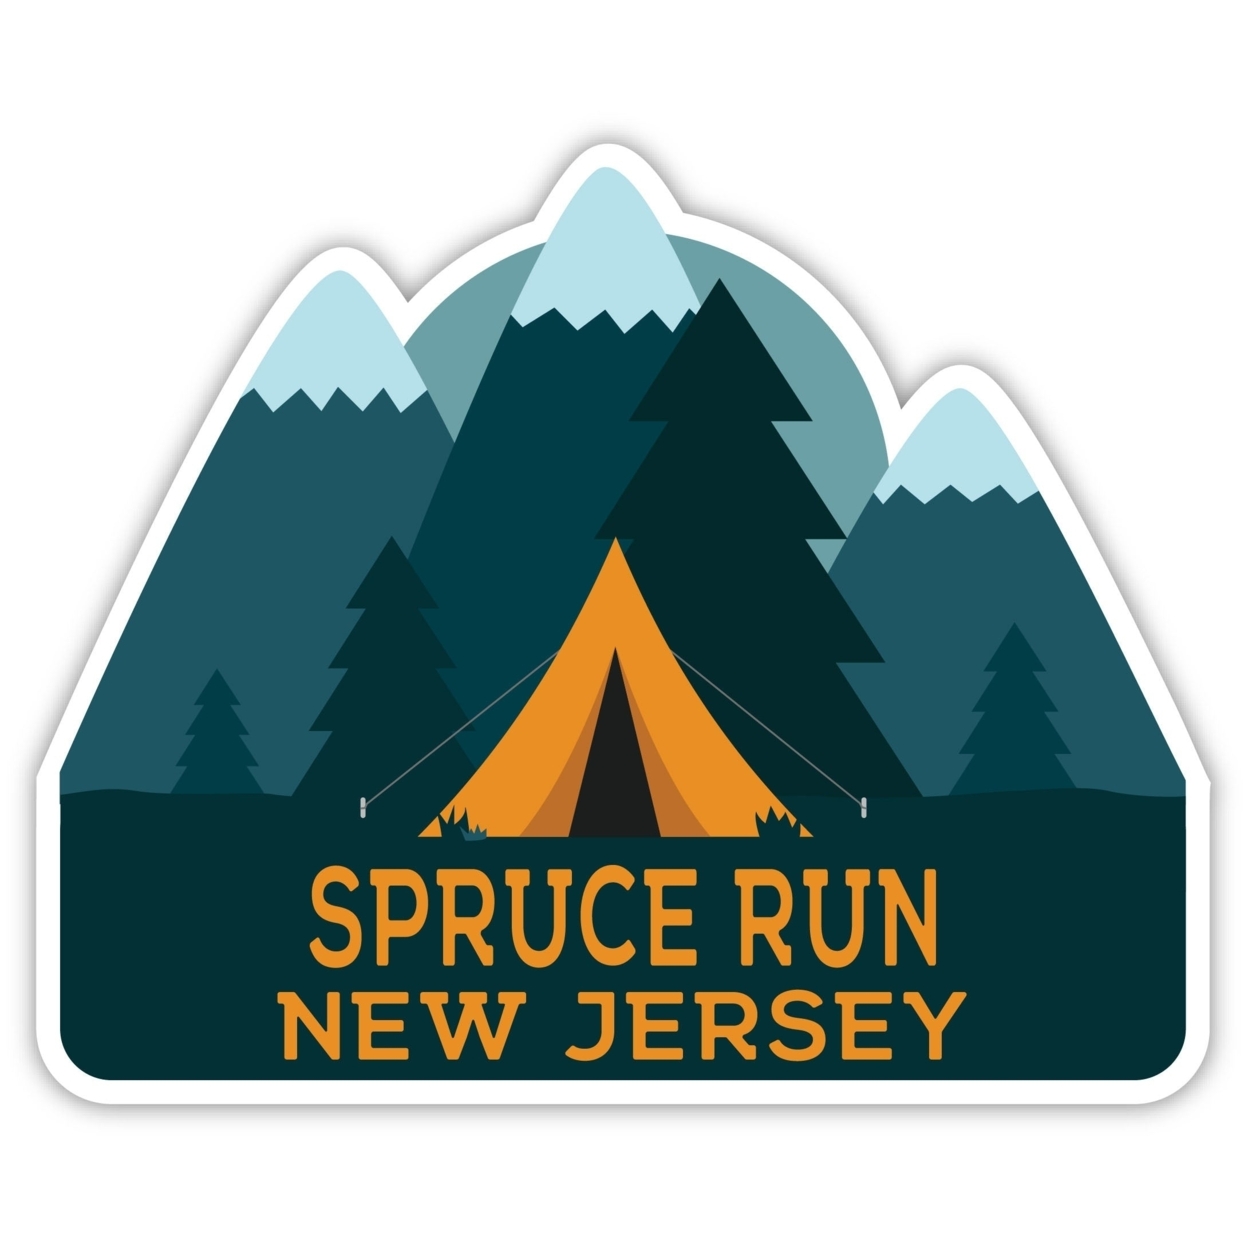 Spruce Run New Jersey Souvenir Decorative Stickers (Choose Theme And Size) - Single Unit, 2-Inch, Tent